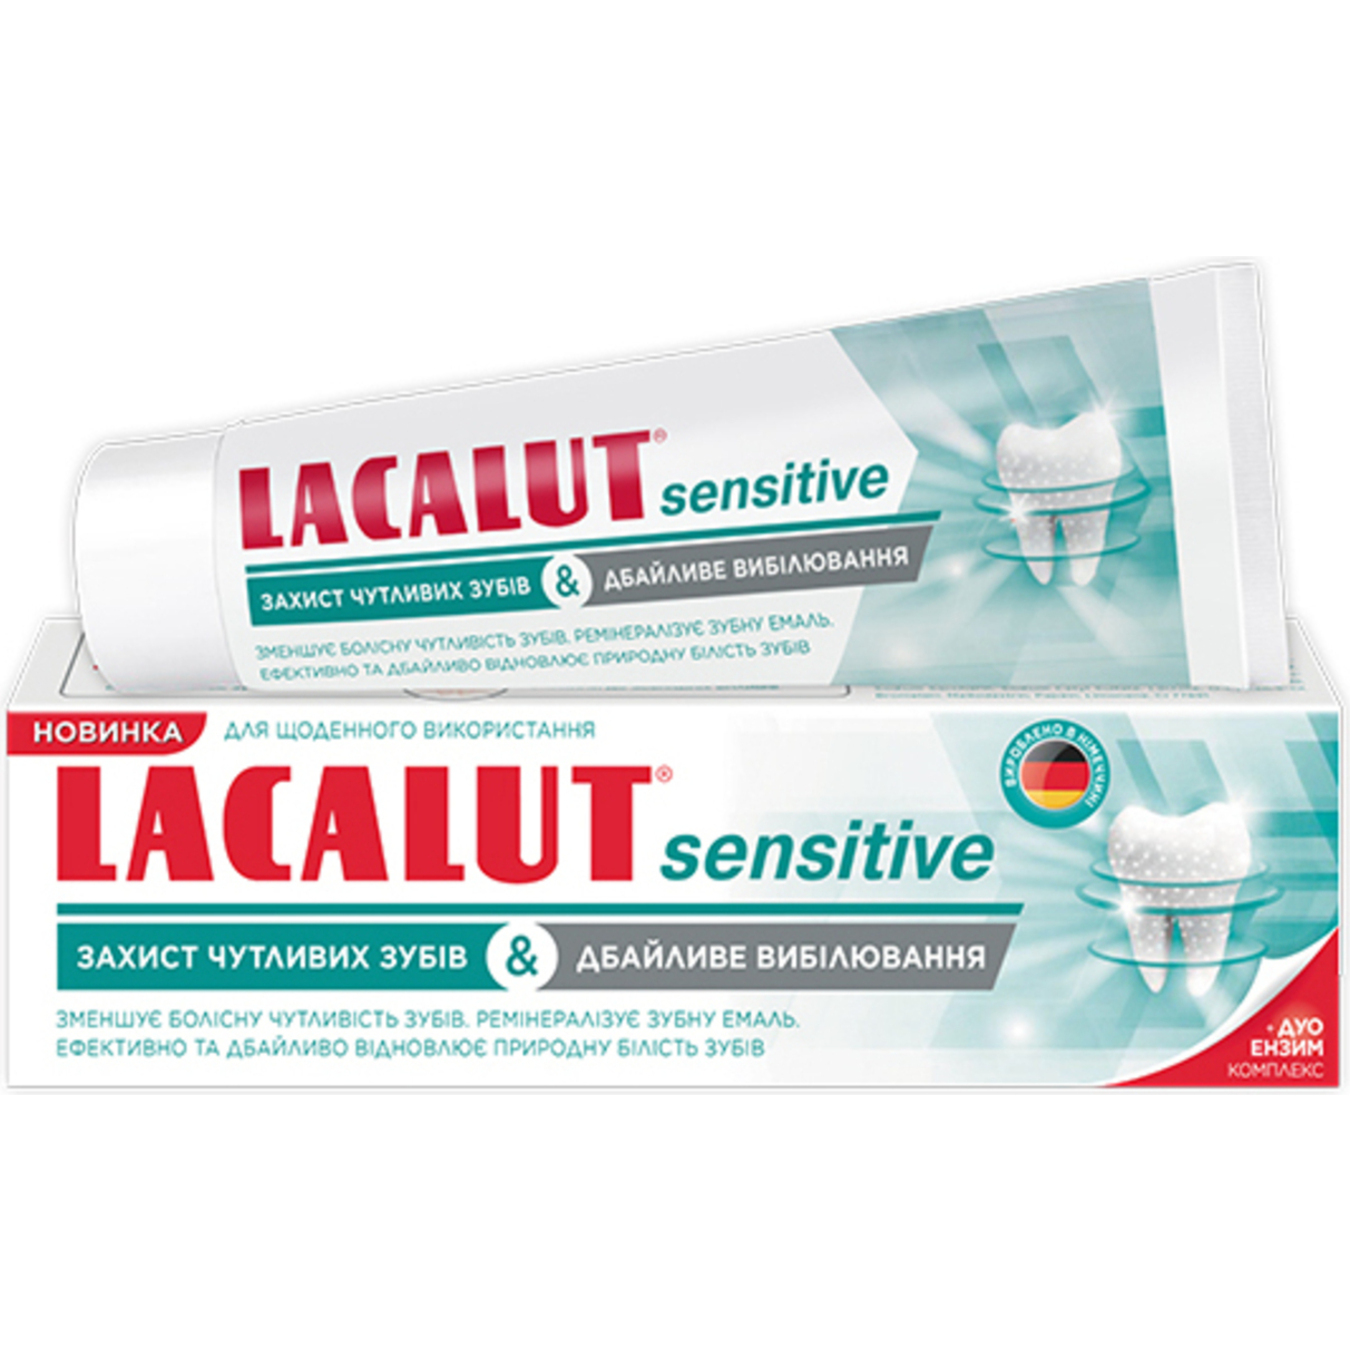 Toothpaste Lacalut Sensitive protection of sensitive teeth and careful whitening 75ml